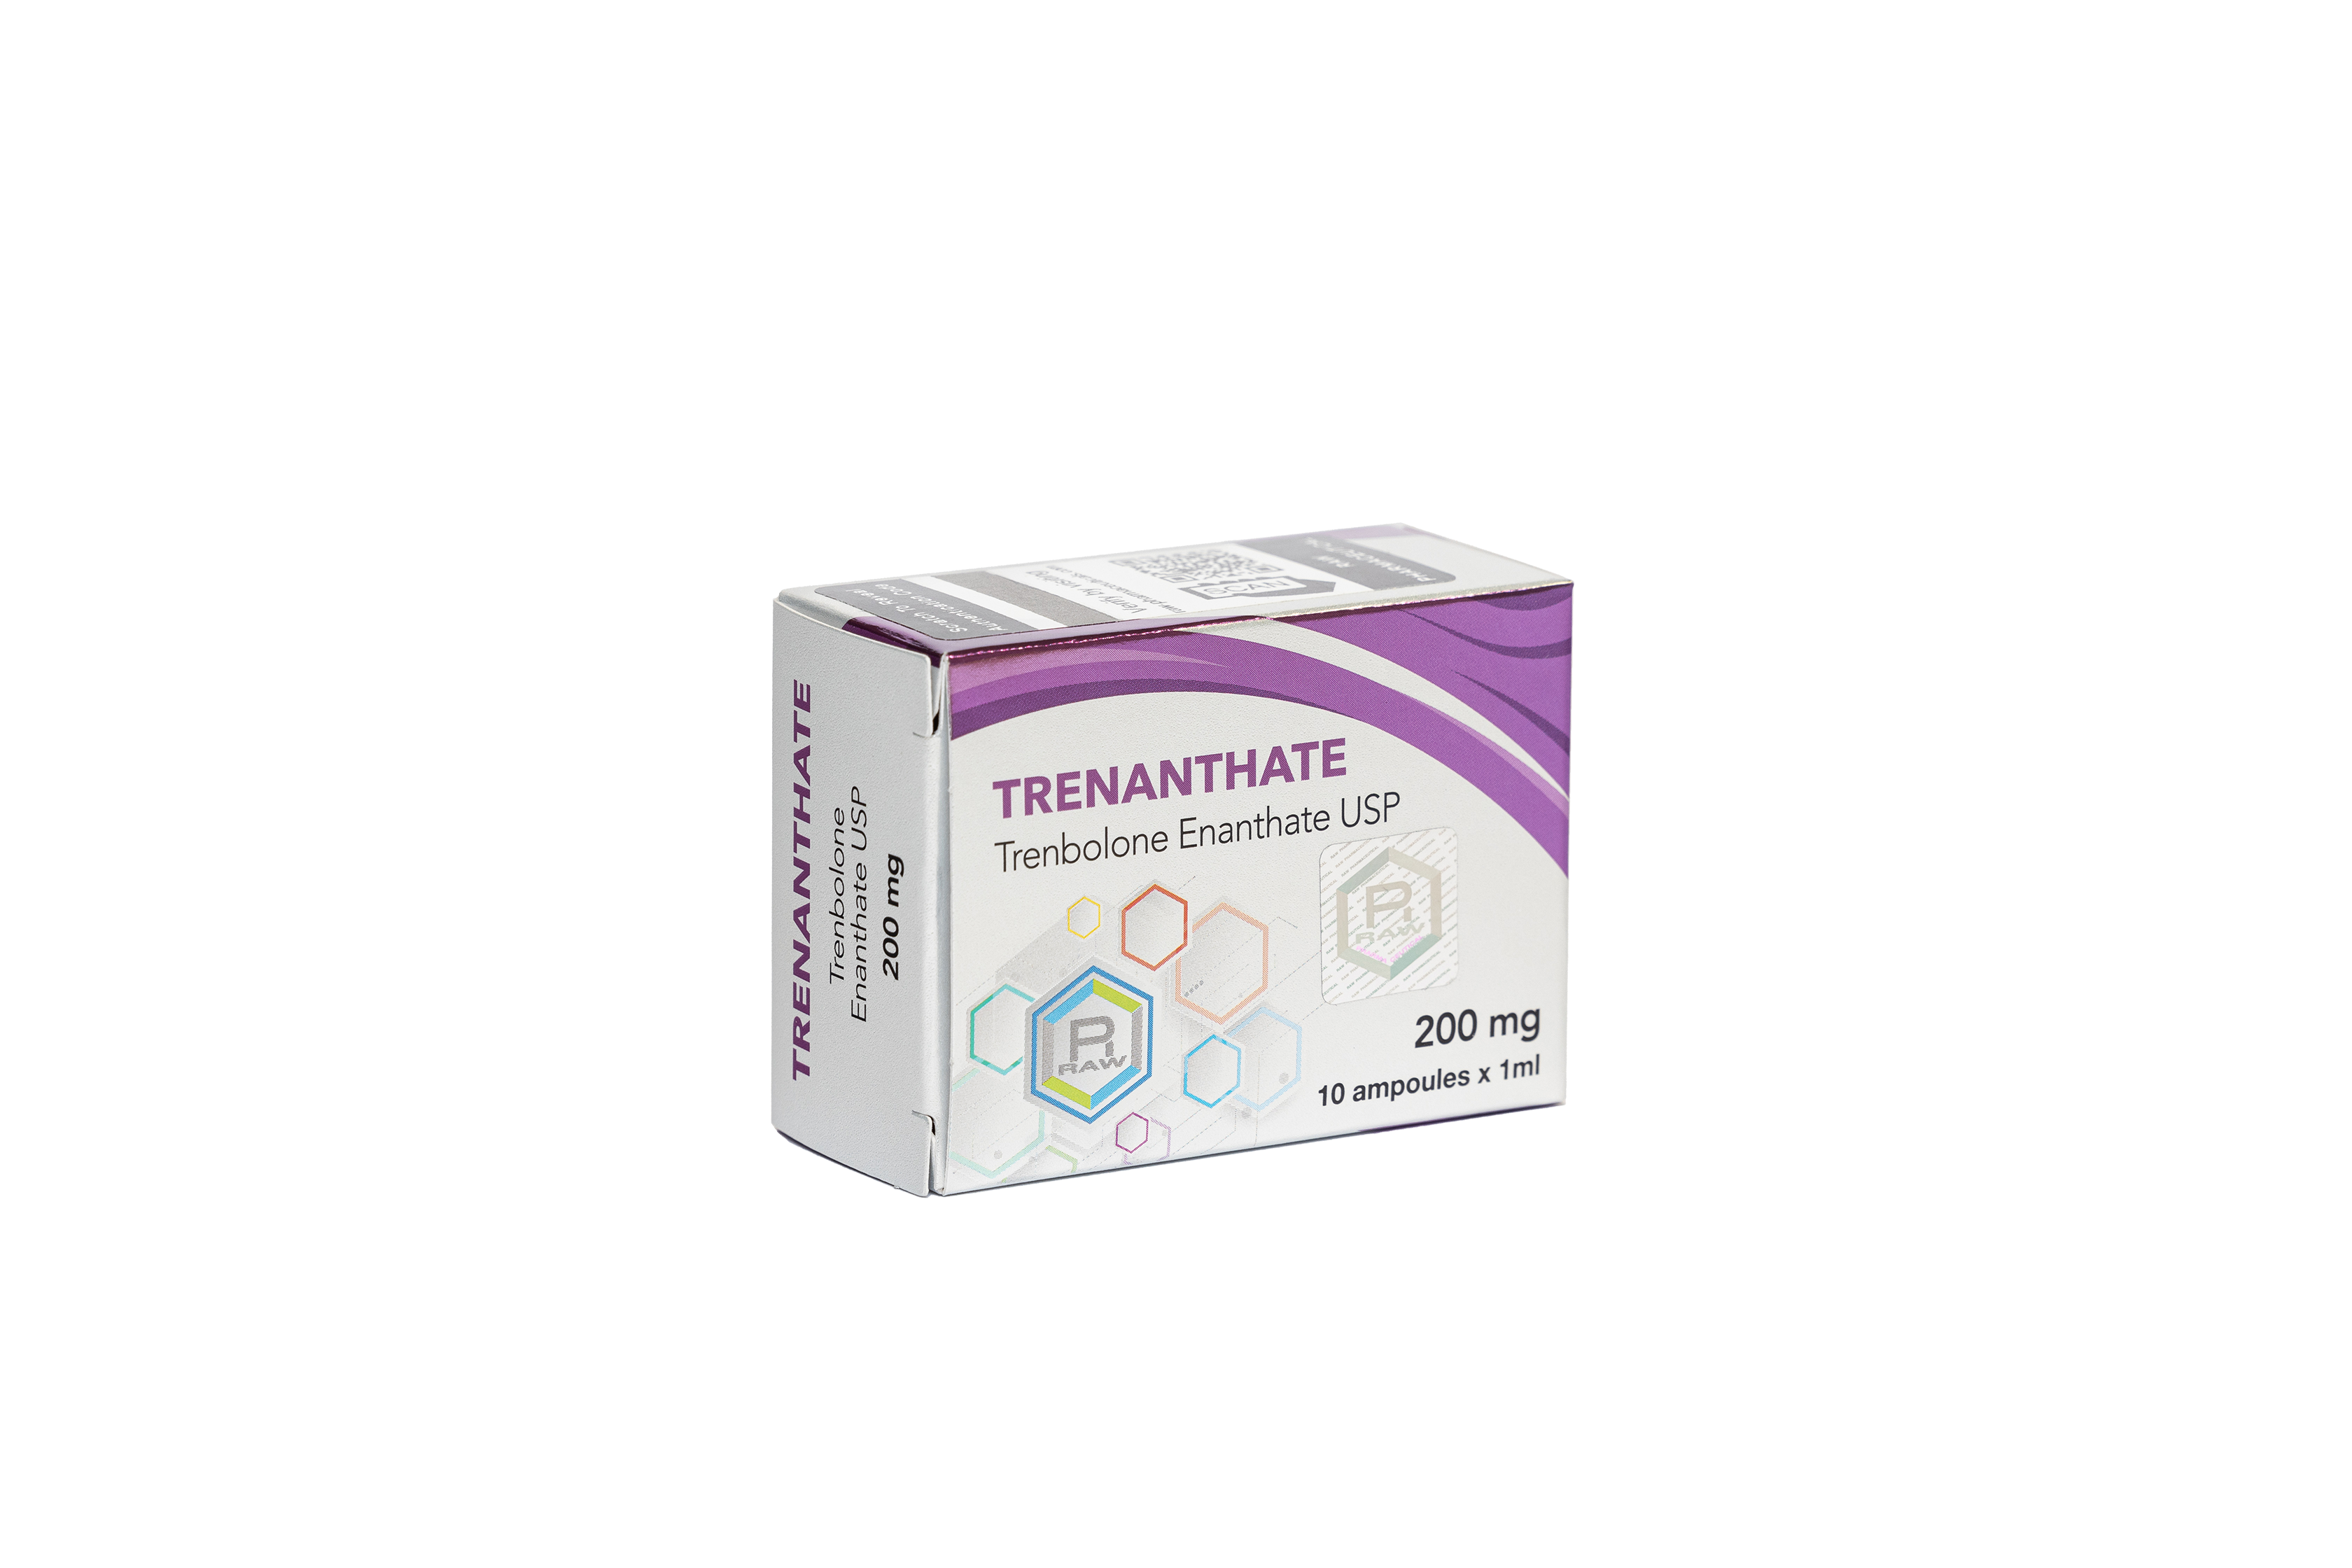 TRENANTHATE